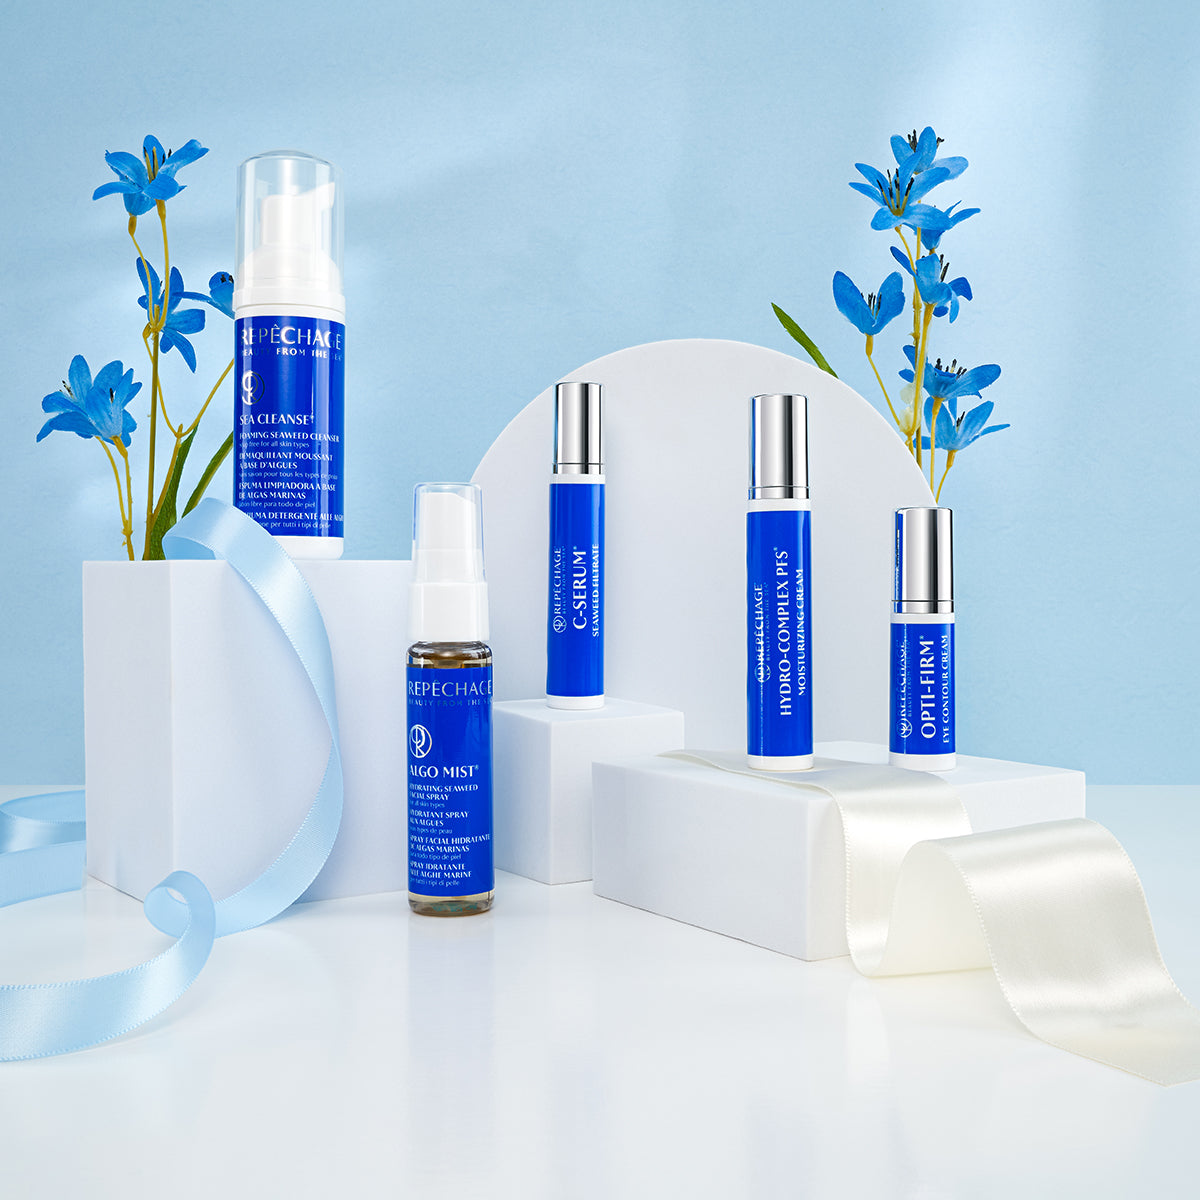 The Hydra Blue Starter Collection with Seaweed Extracts for All Skin Types